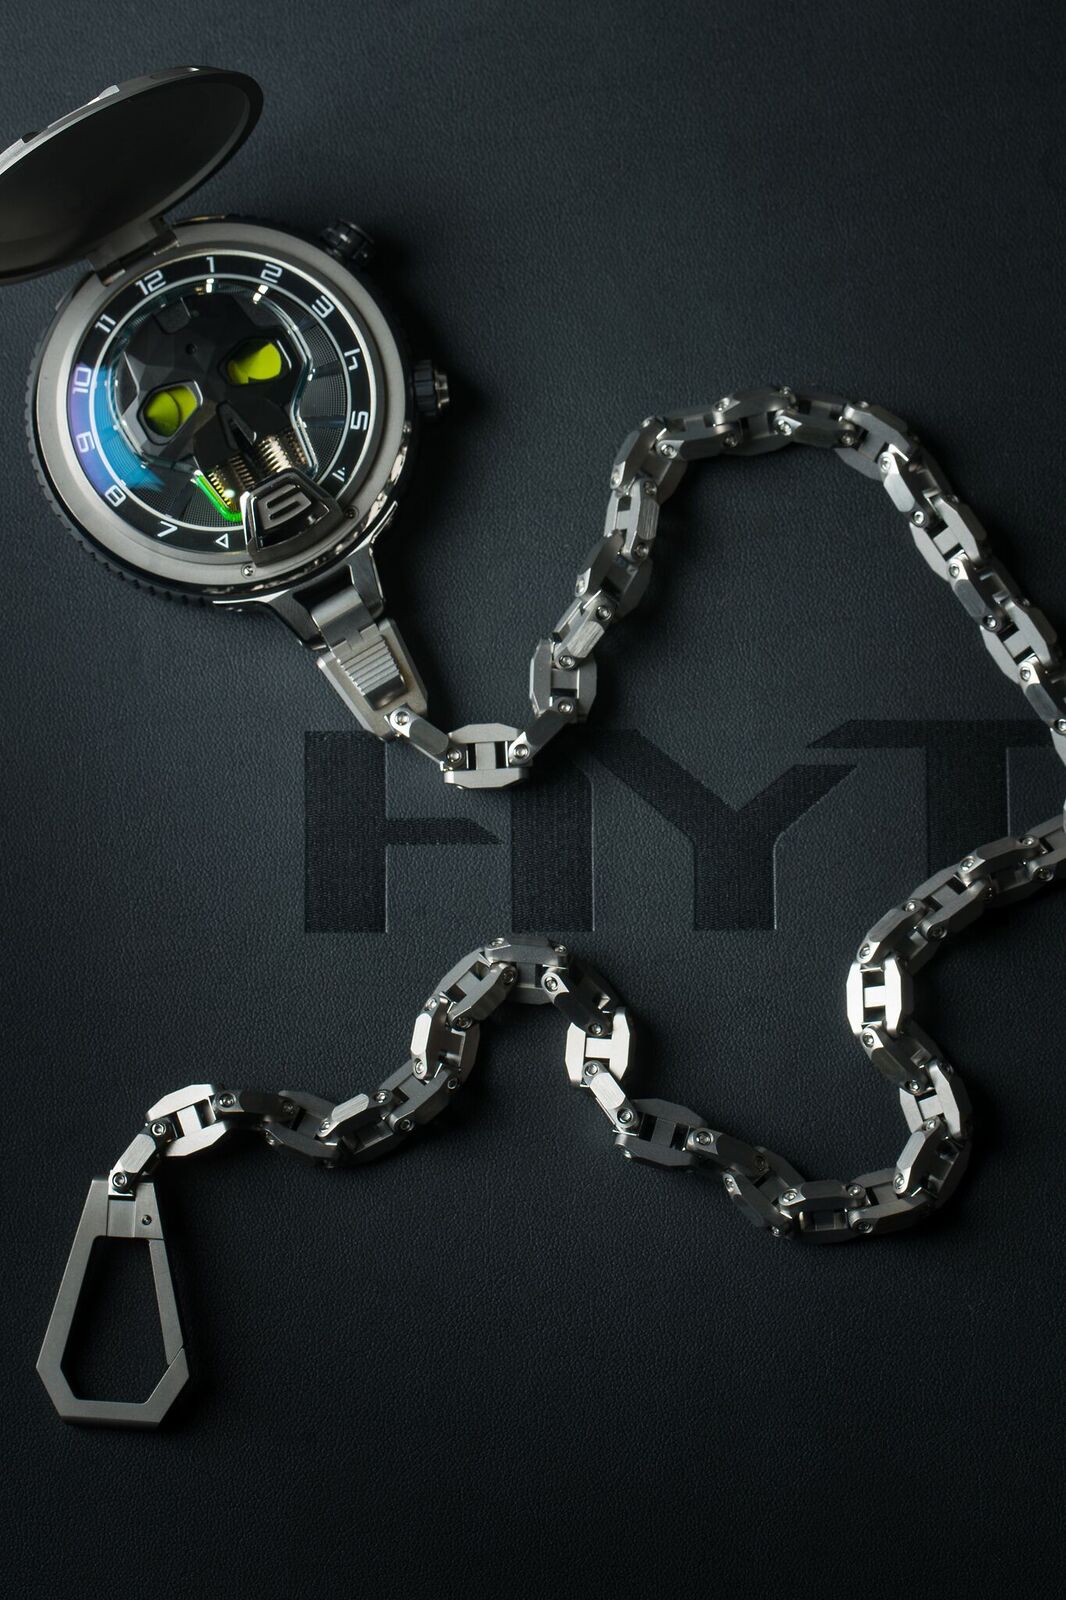 Pre-SIHH 2017: HYT Brings Mechanical Lumination to the Pocket Watch